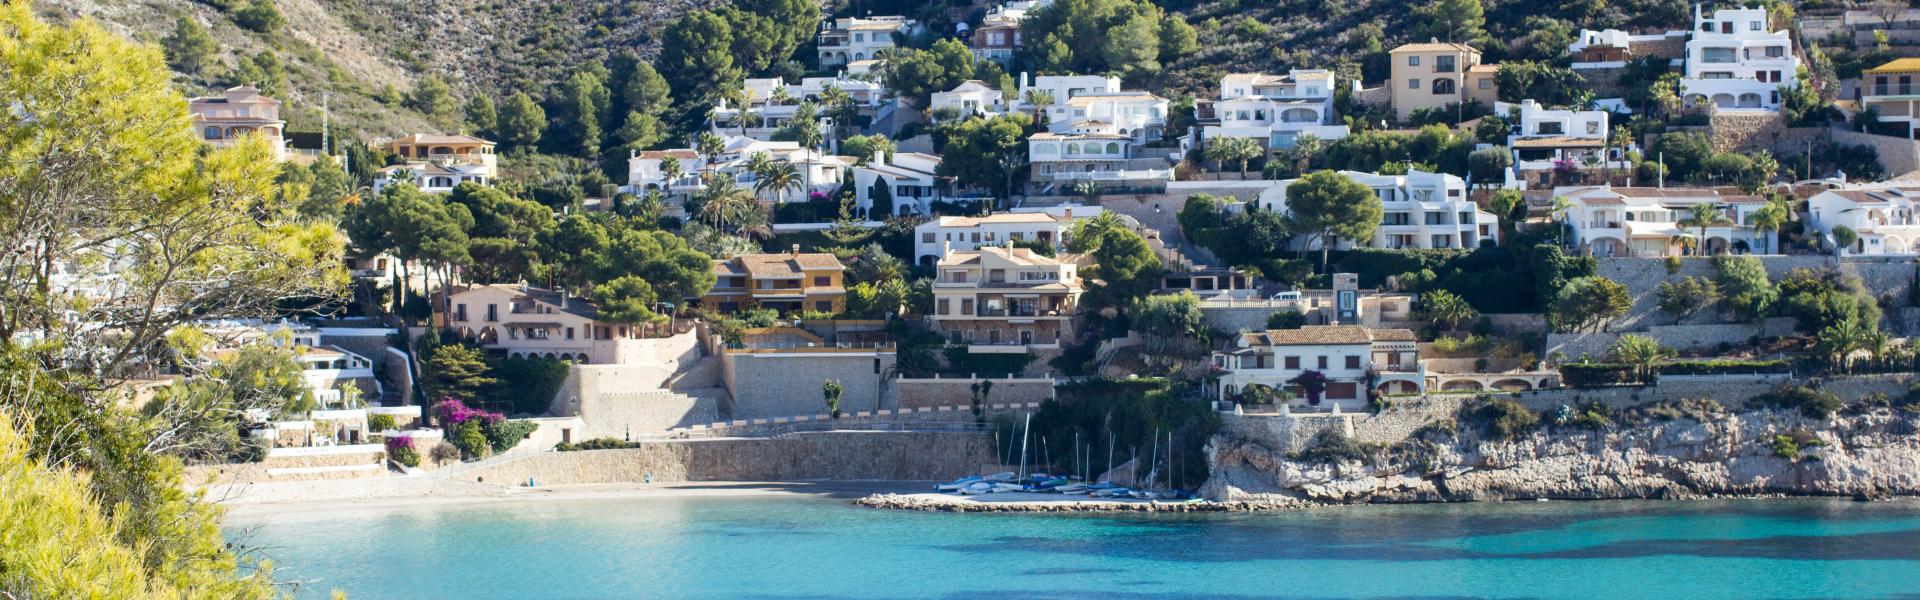 Find the perfect vacation home in Moraira - Casamundo